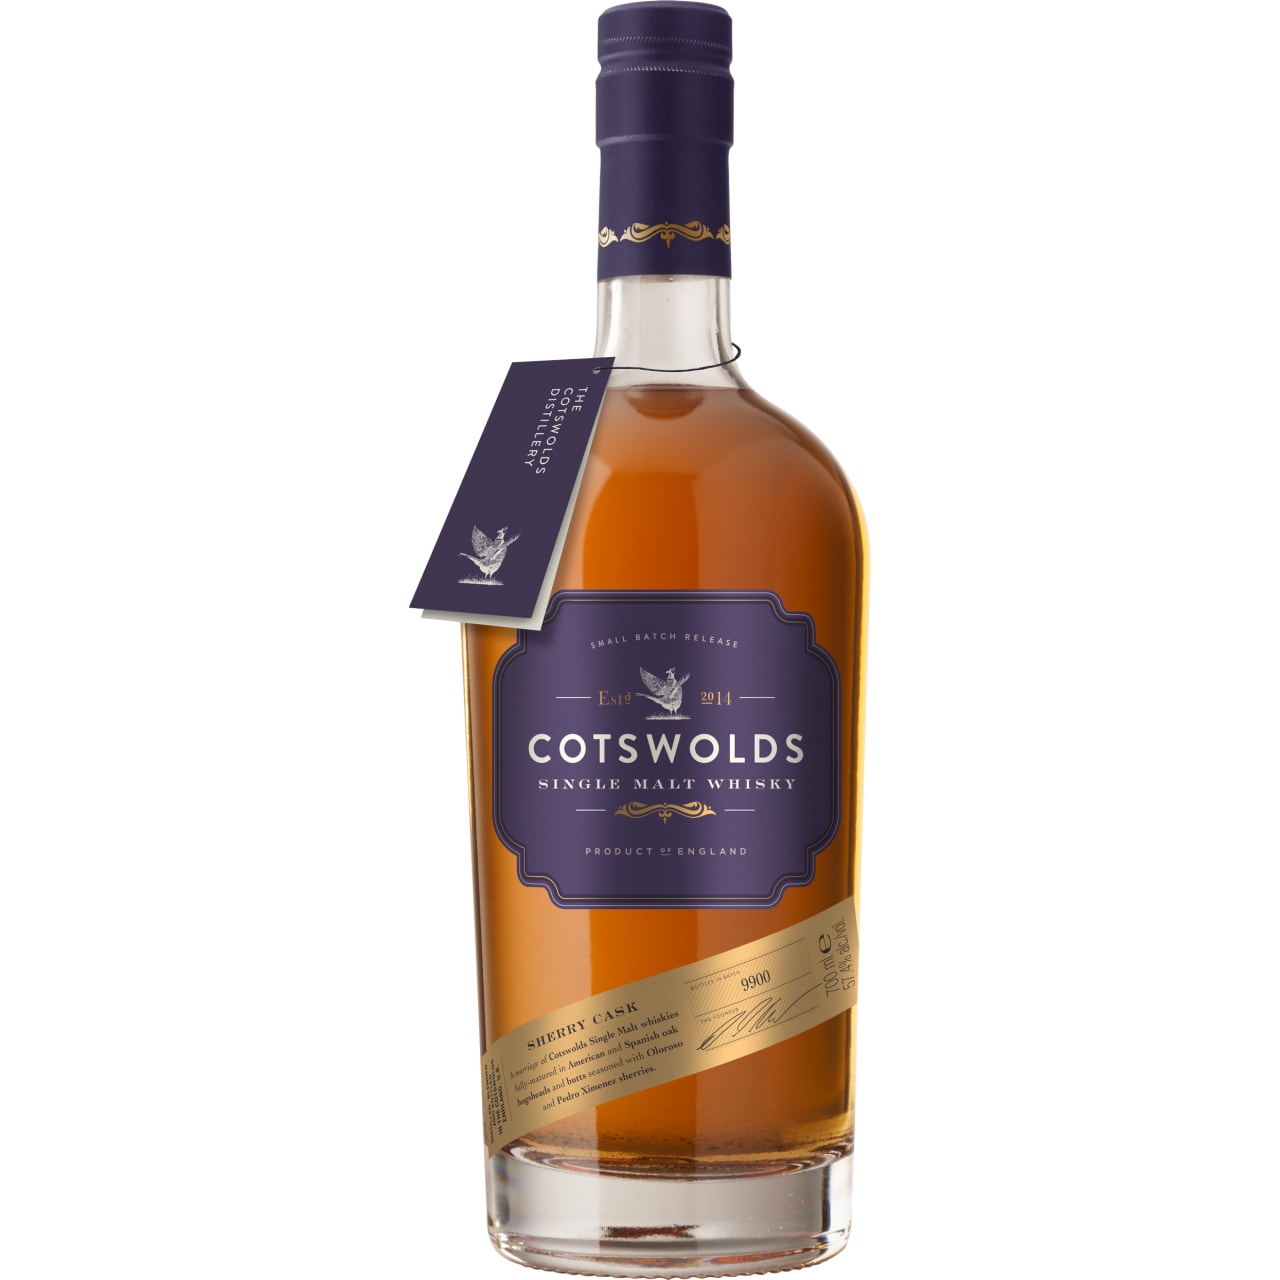 Product Image - Cotswolds Sherry Cask Whisky